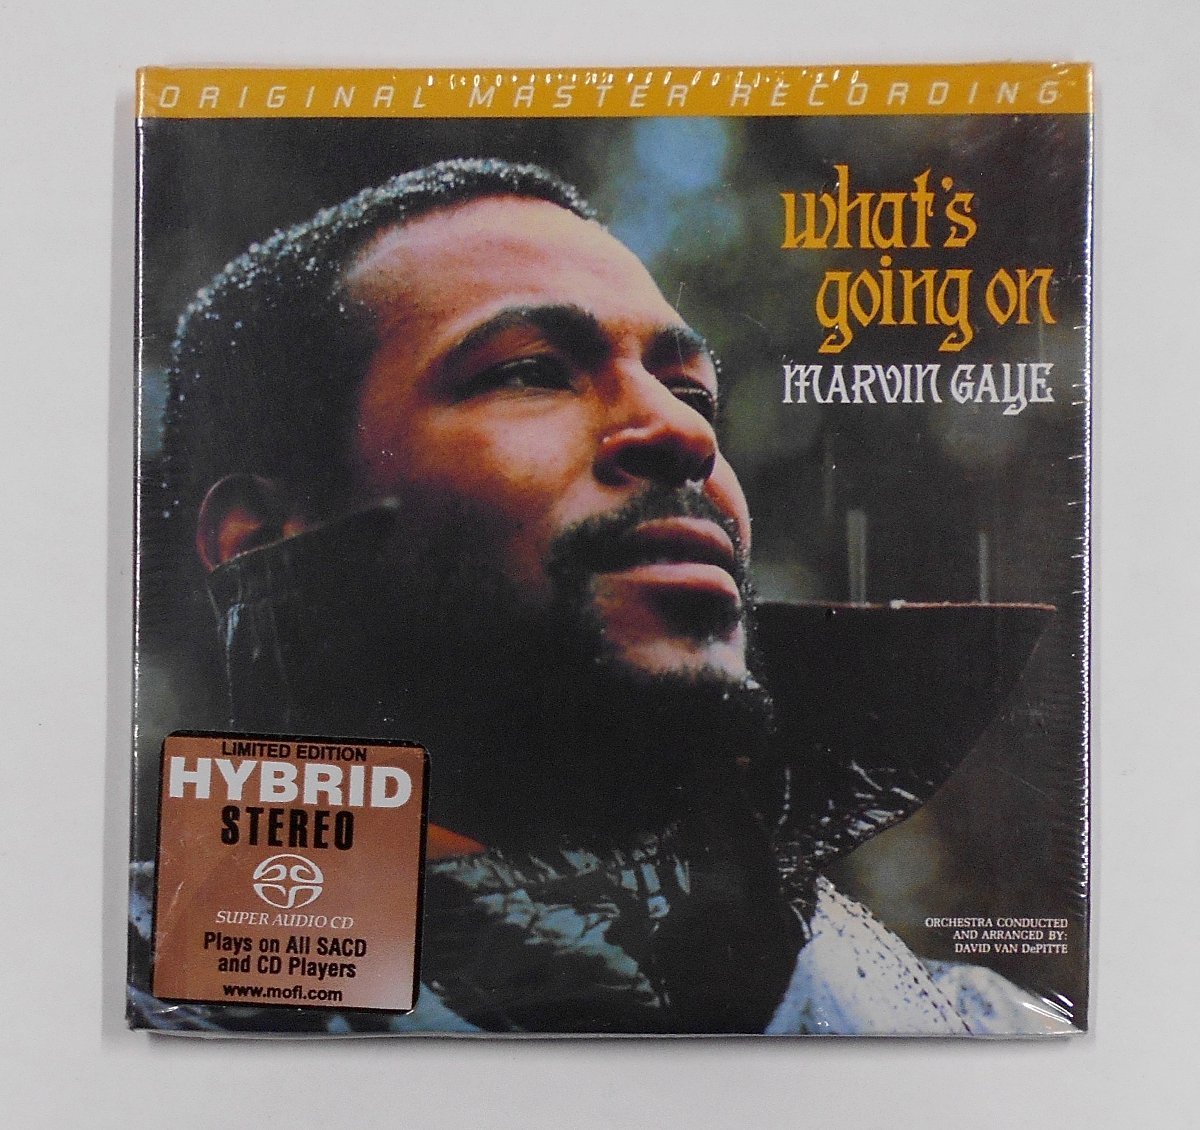 CD MARVIN GAYE マーヴィン・ゲイ / WHAT'S GOING ON LIMITED EDITION HYBRID STEREO 紙ジャケット HYBRID SACD 【ス187】_画像1